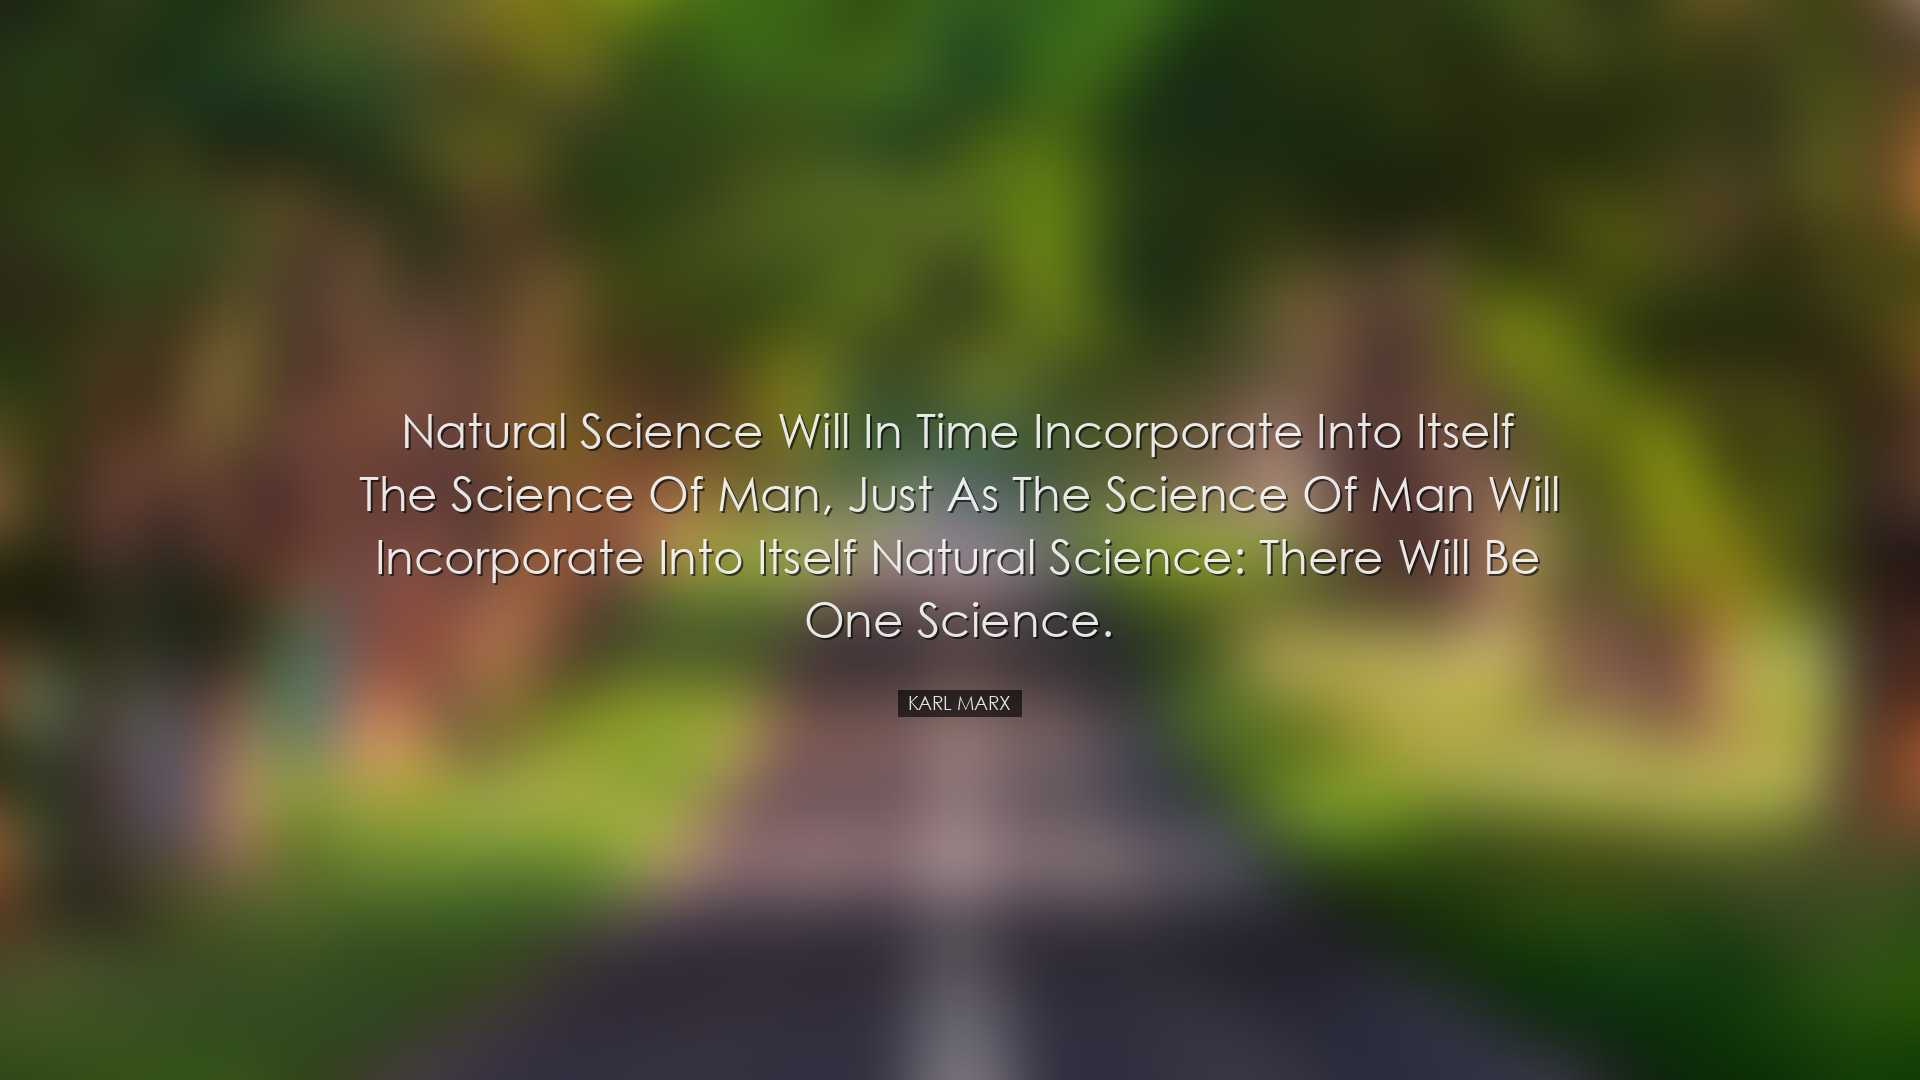 Natural science will in time incorporate into itself the science o